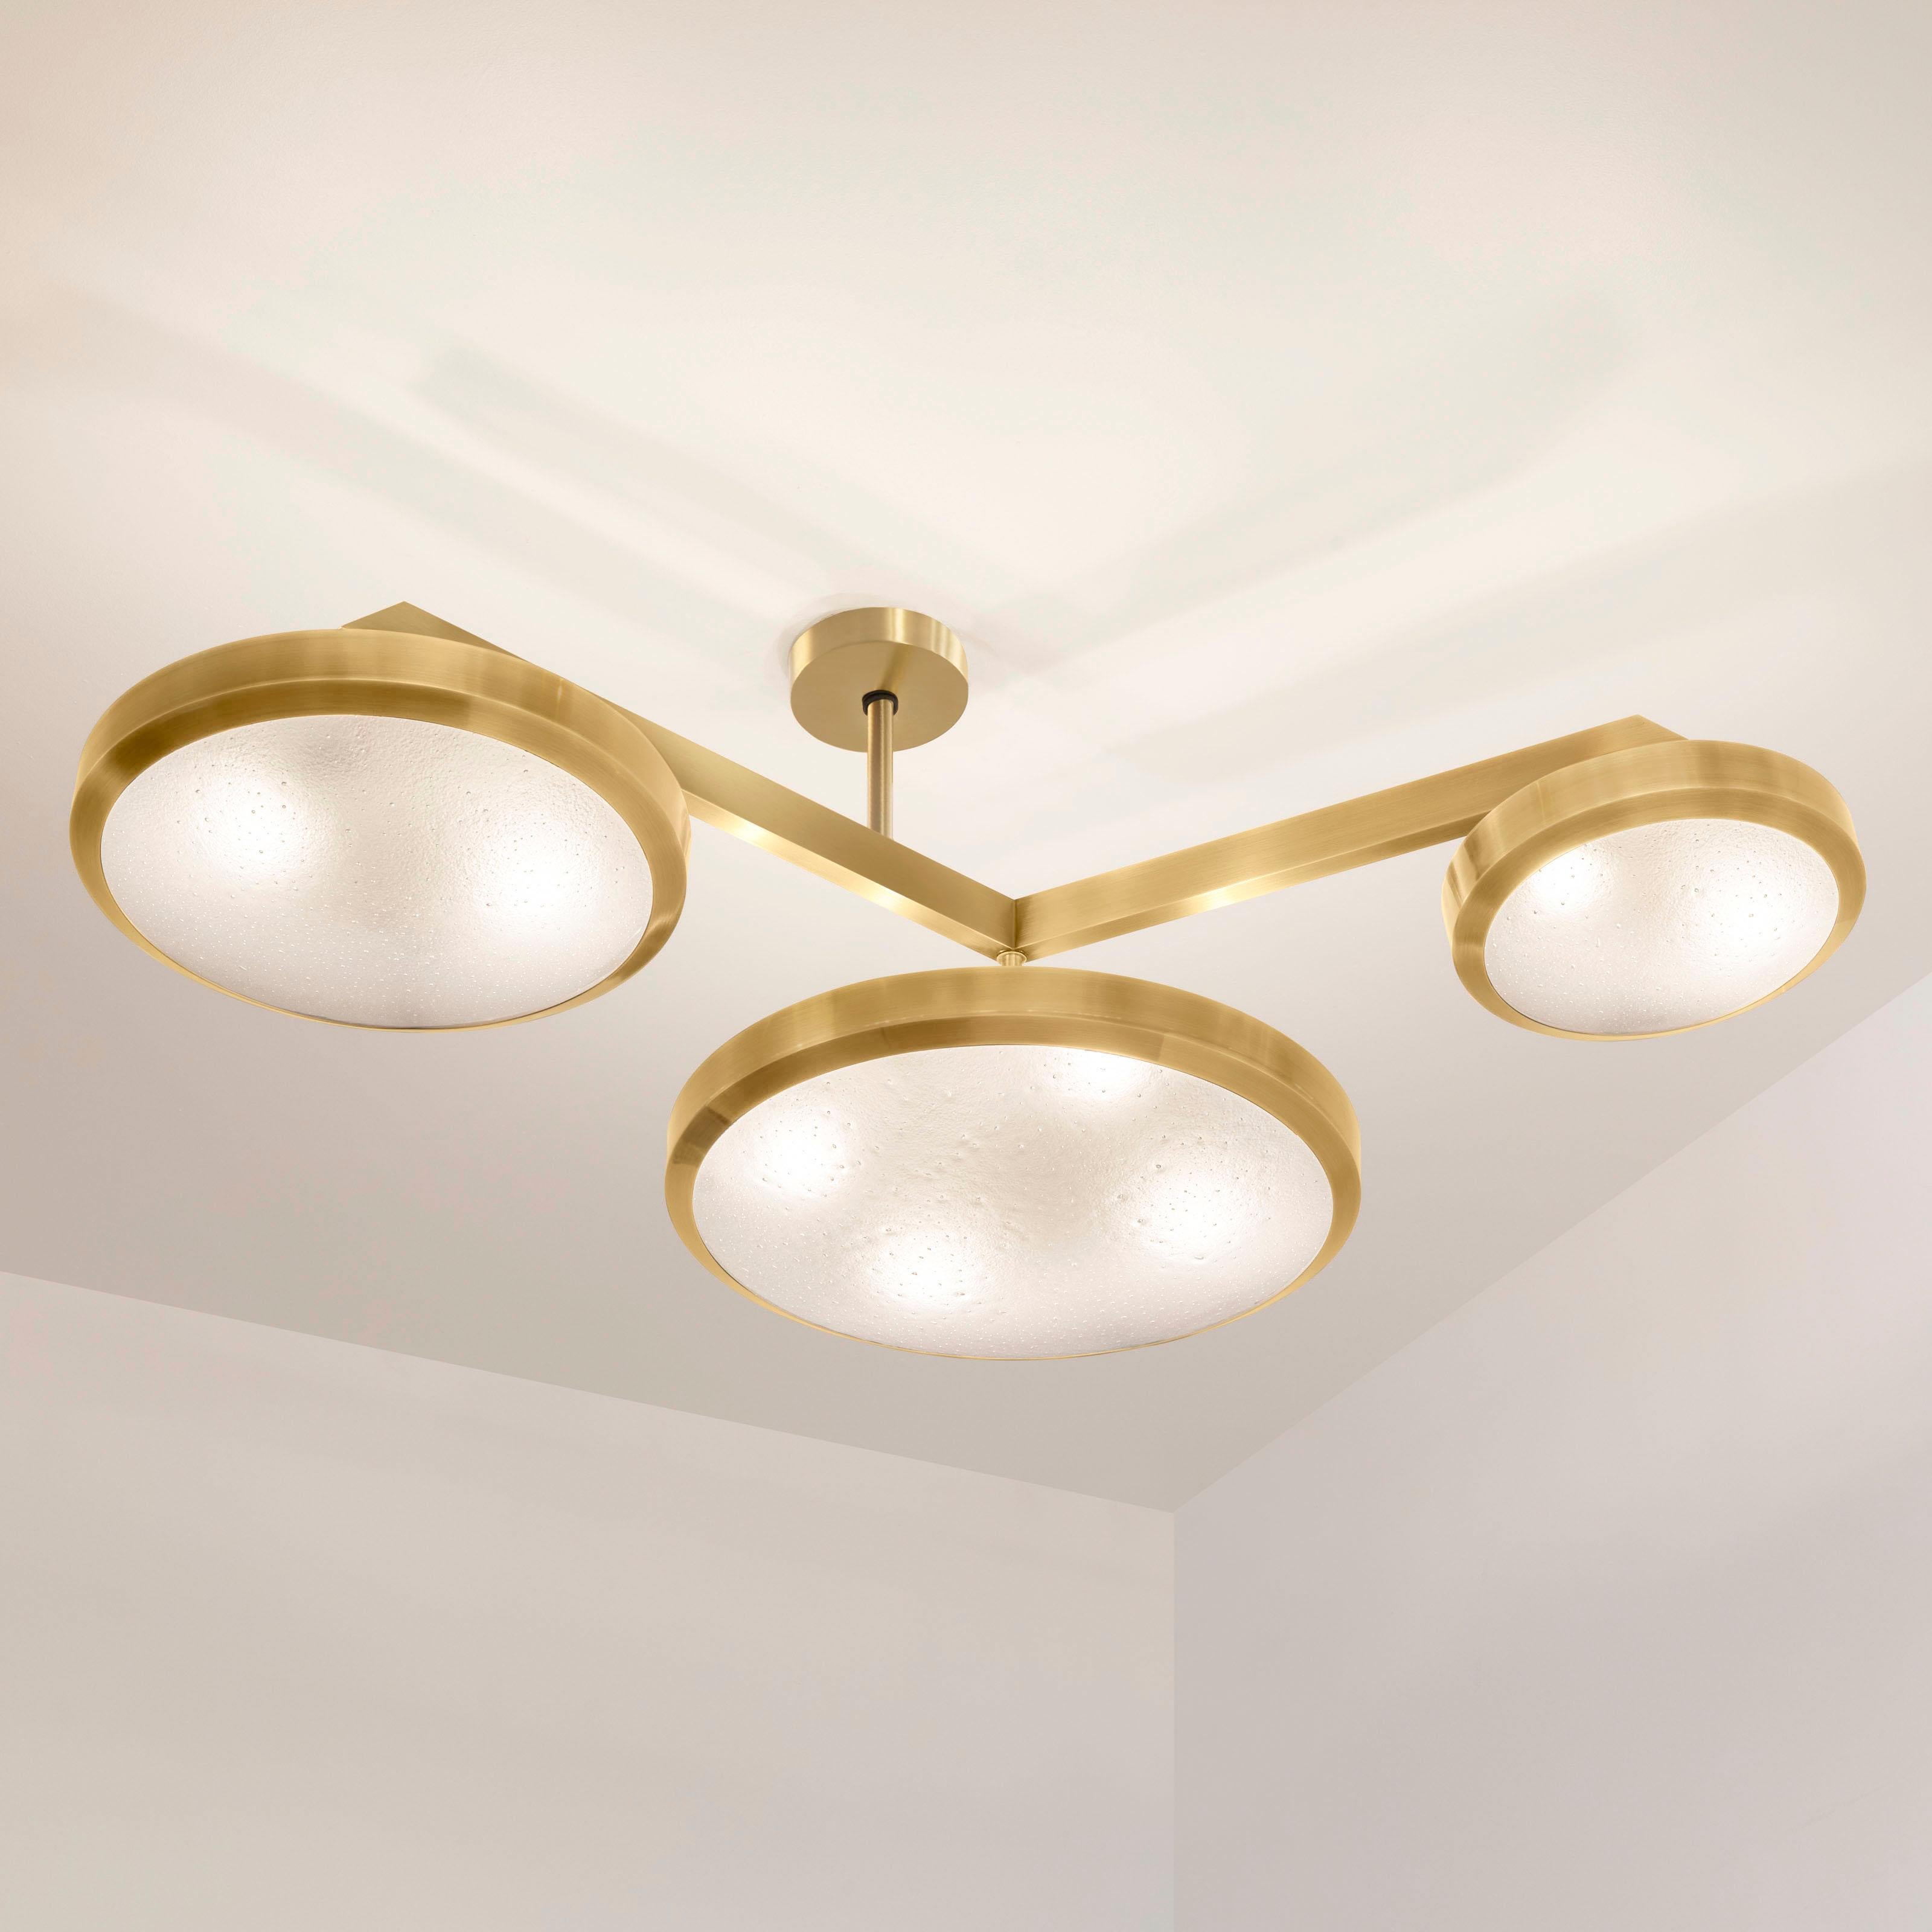 Italian Zeta Ceiling Light by Gaspare Asaro-Polished Brass Finish For Sale